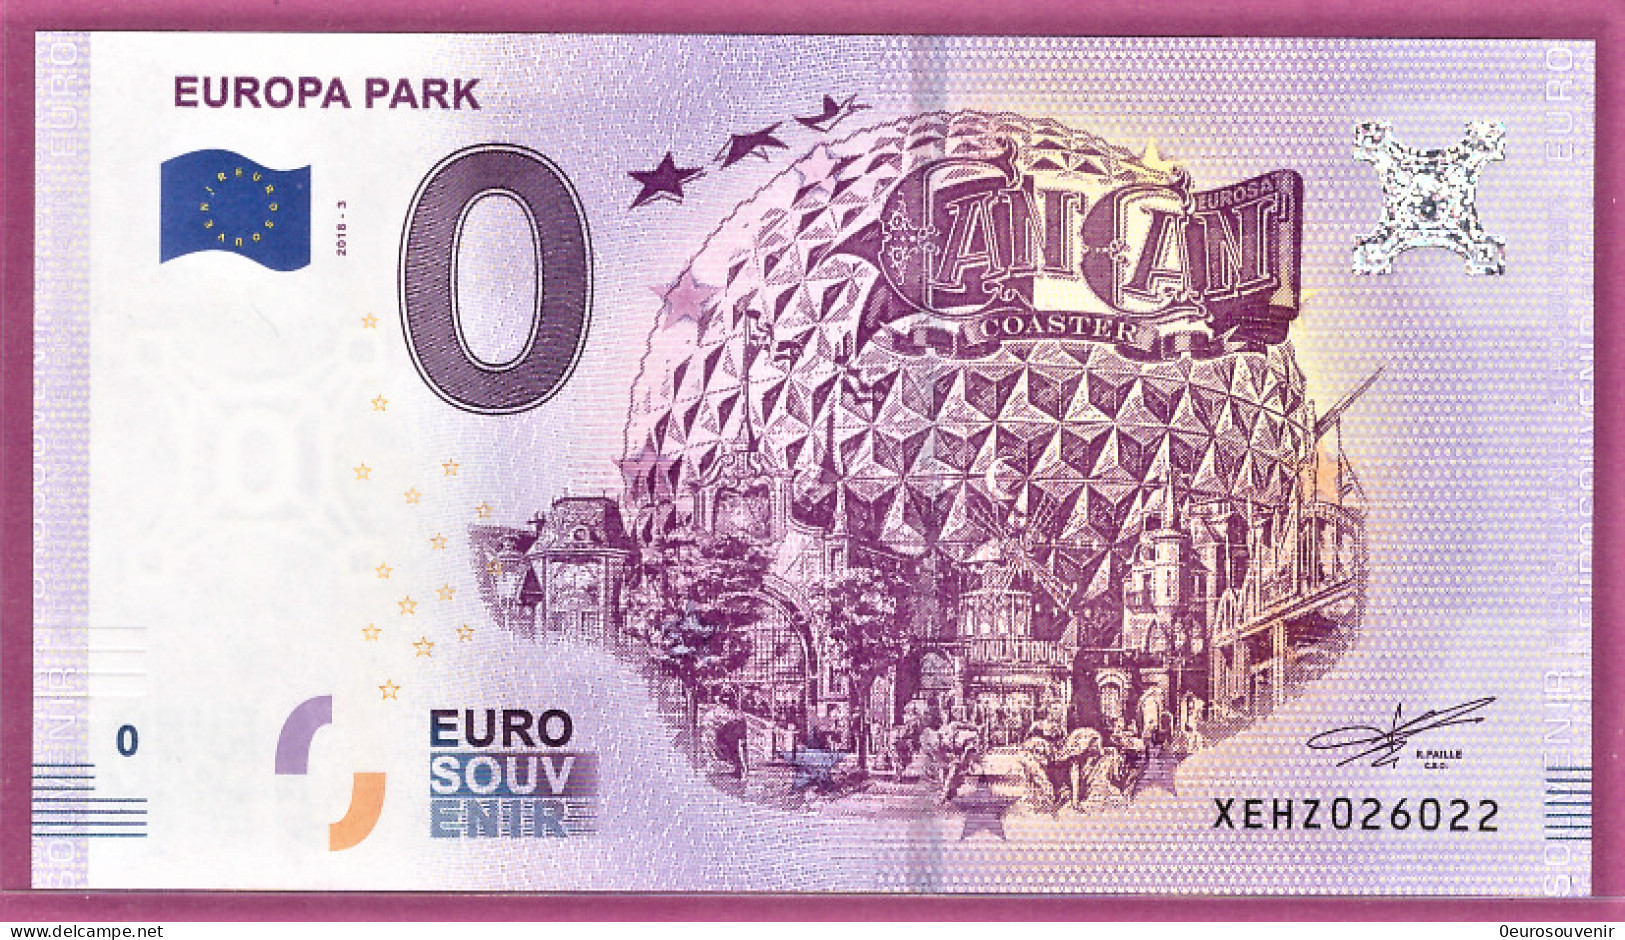 0-Euro XEHZ 2018-3 EUROPA PARK - CAN CAN COASTER - Private Proofs / Unofficial